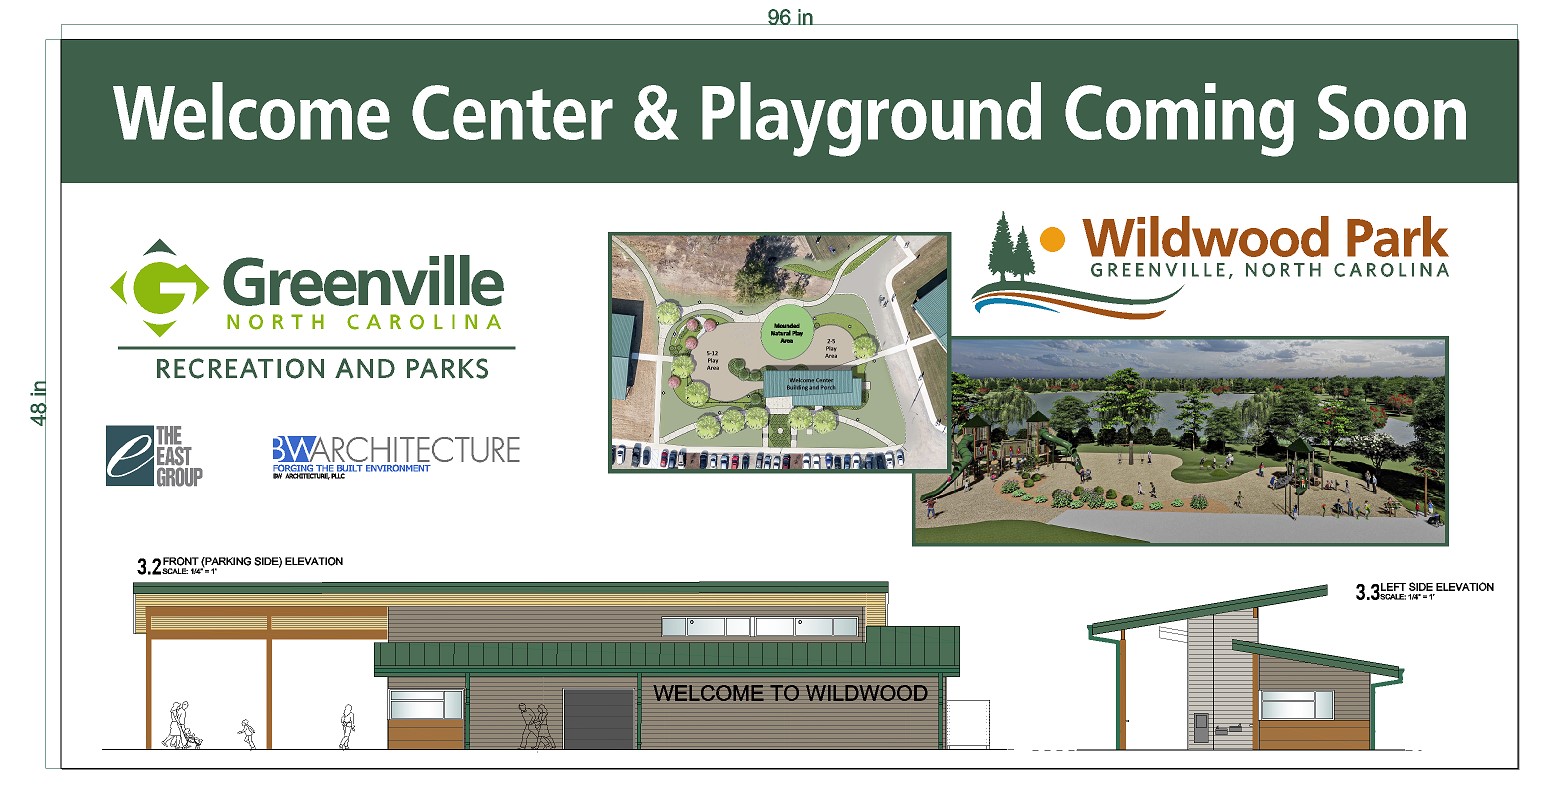 Coming soon sign for welcome center and playground